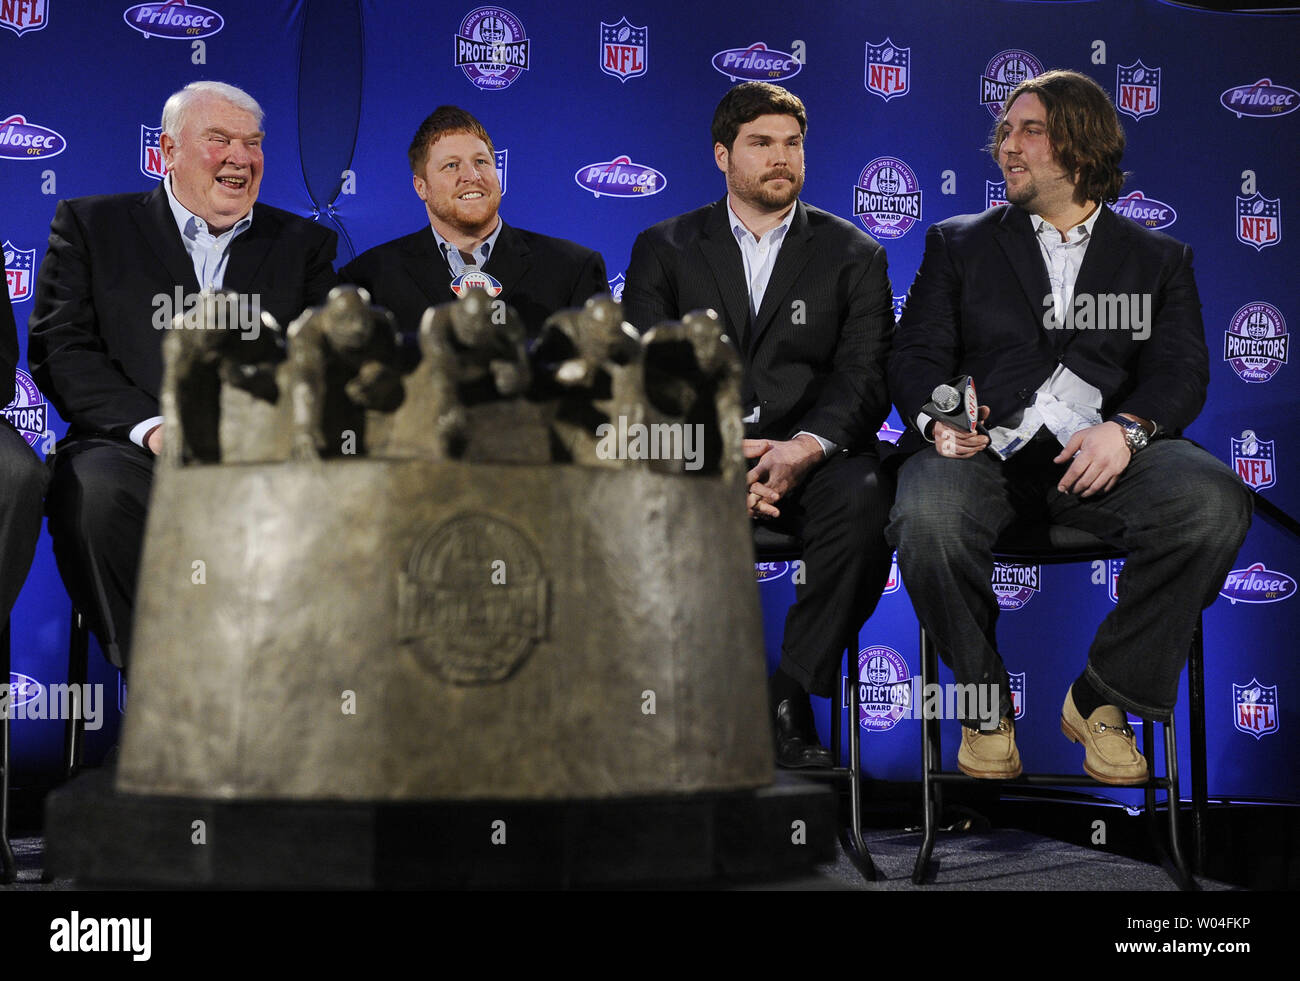 John Madden (L) presents the Madden Most Valuable Protectors Award to the New England Patriots, represented by Dan Koppen, Dan Connolly and Mark LeVoir (L to R), after they were named the year's best offensive line during the week of Super Bowl XLV in Dallas, Texas, on February 3, 2011. The Pittsburgh Steelers will take on the Green Bay Packers on February 6, 2011.    UPI/Roger L. Wollenberg Stock Photo